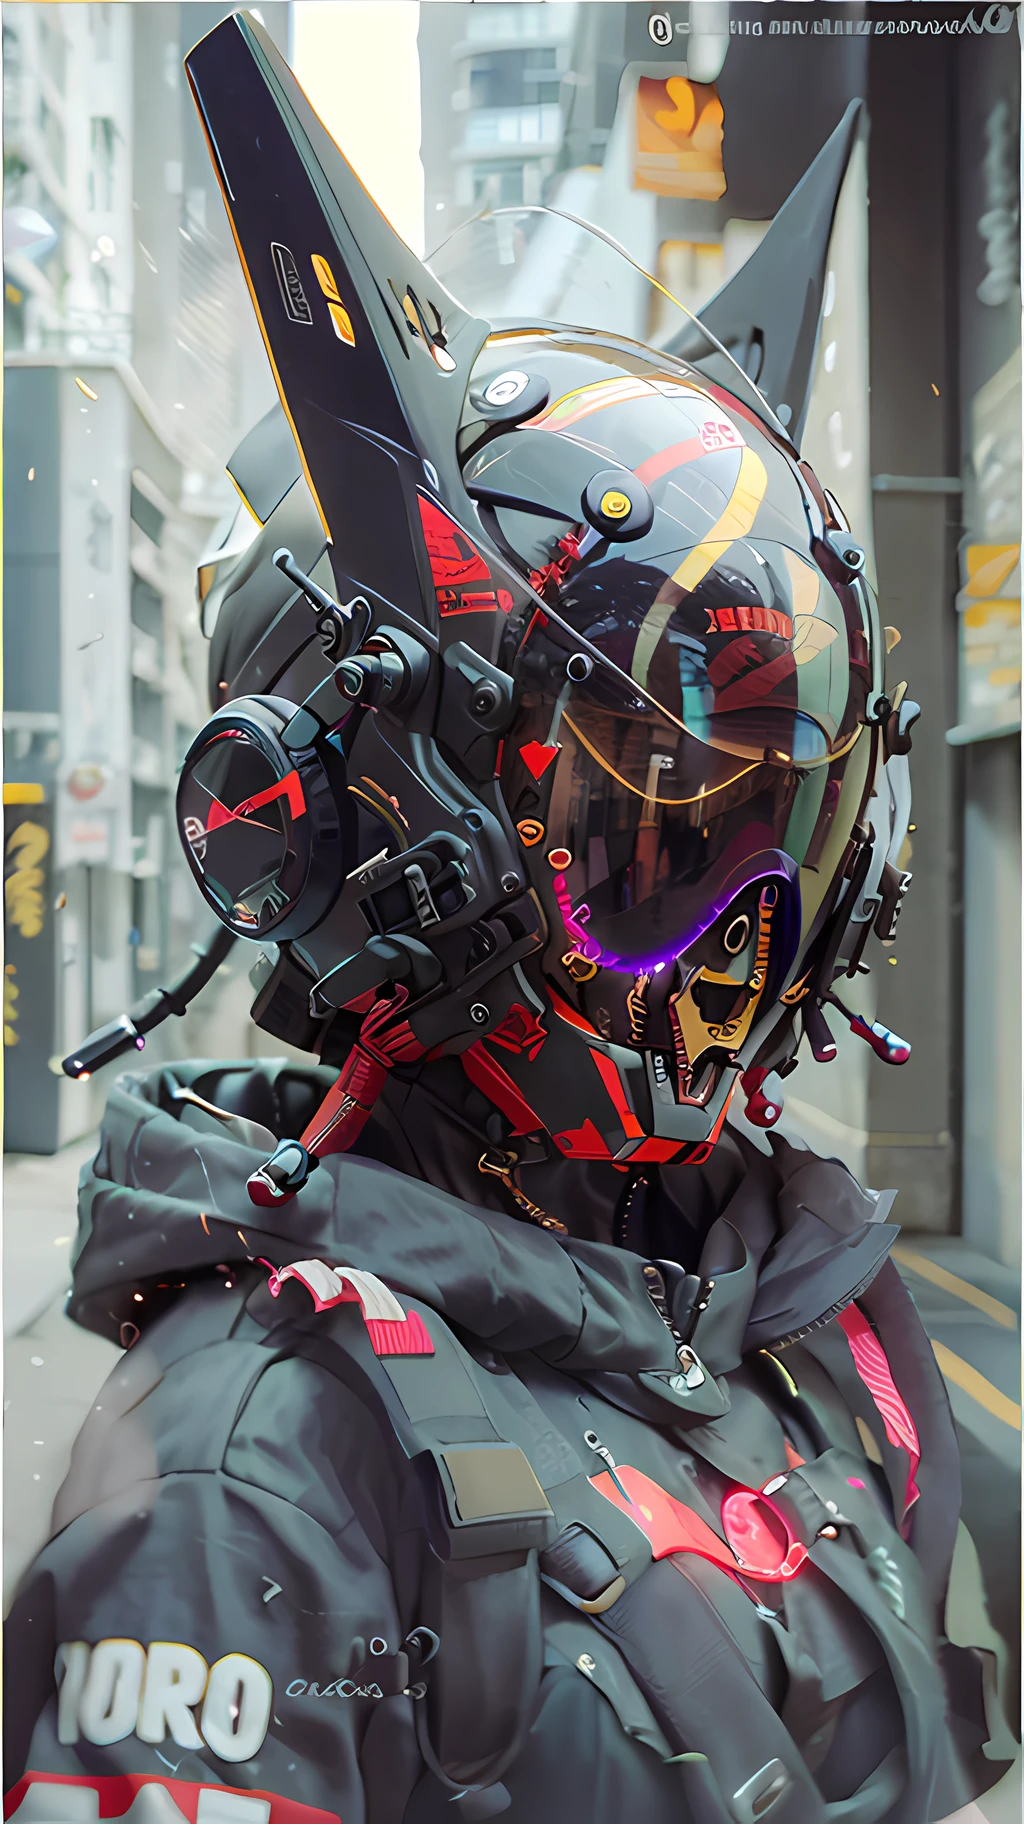 Original, masterpiece, top quality, cyborg woman in a red circle illuminates cyber helmet with black colored ears, black jacket, sunny day, on the street